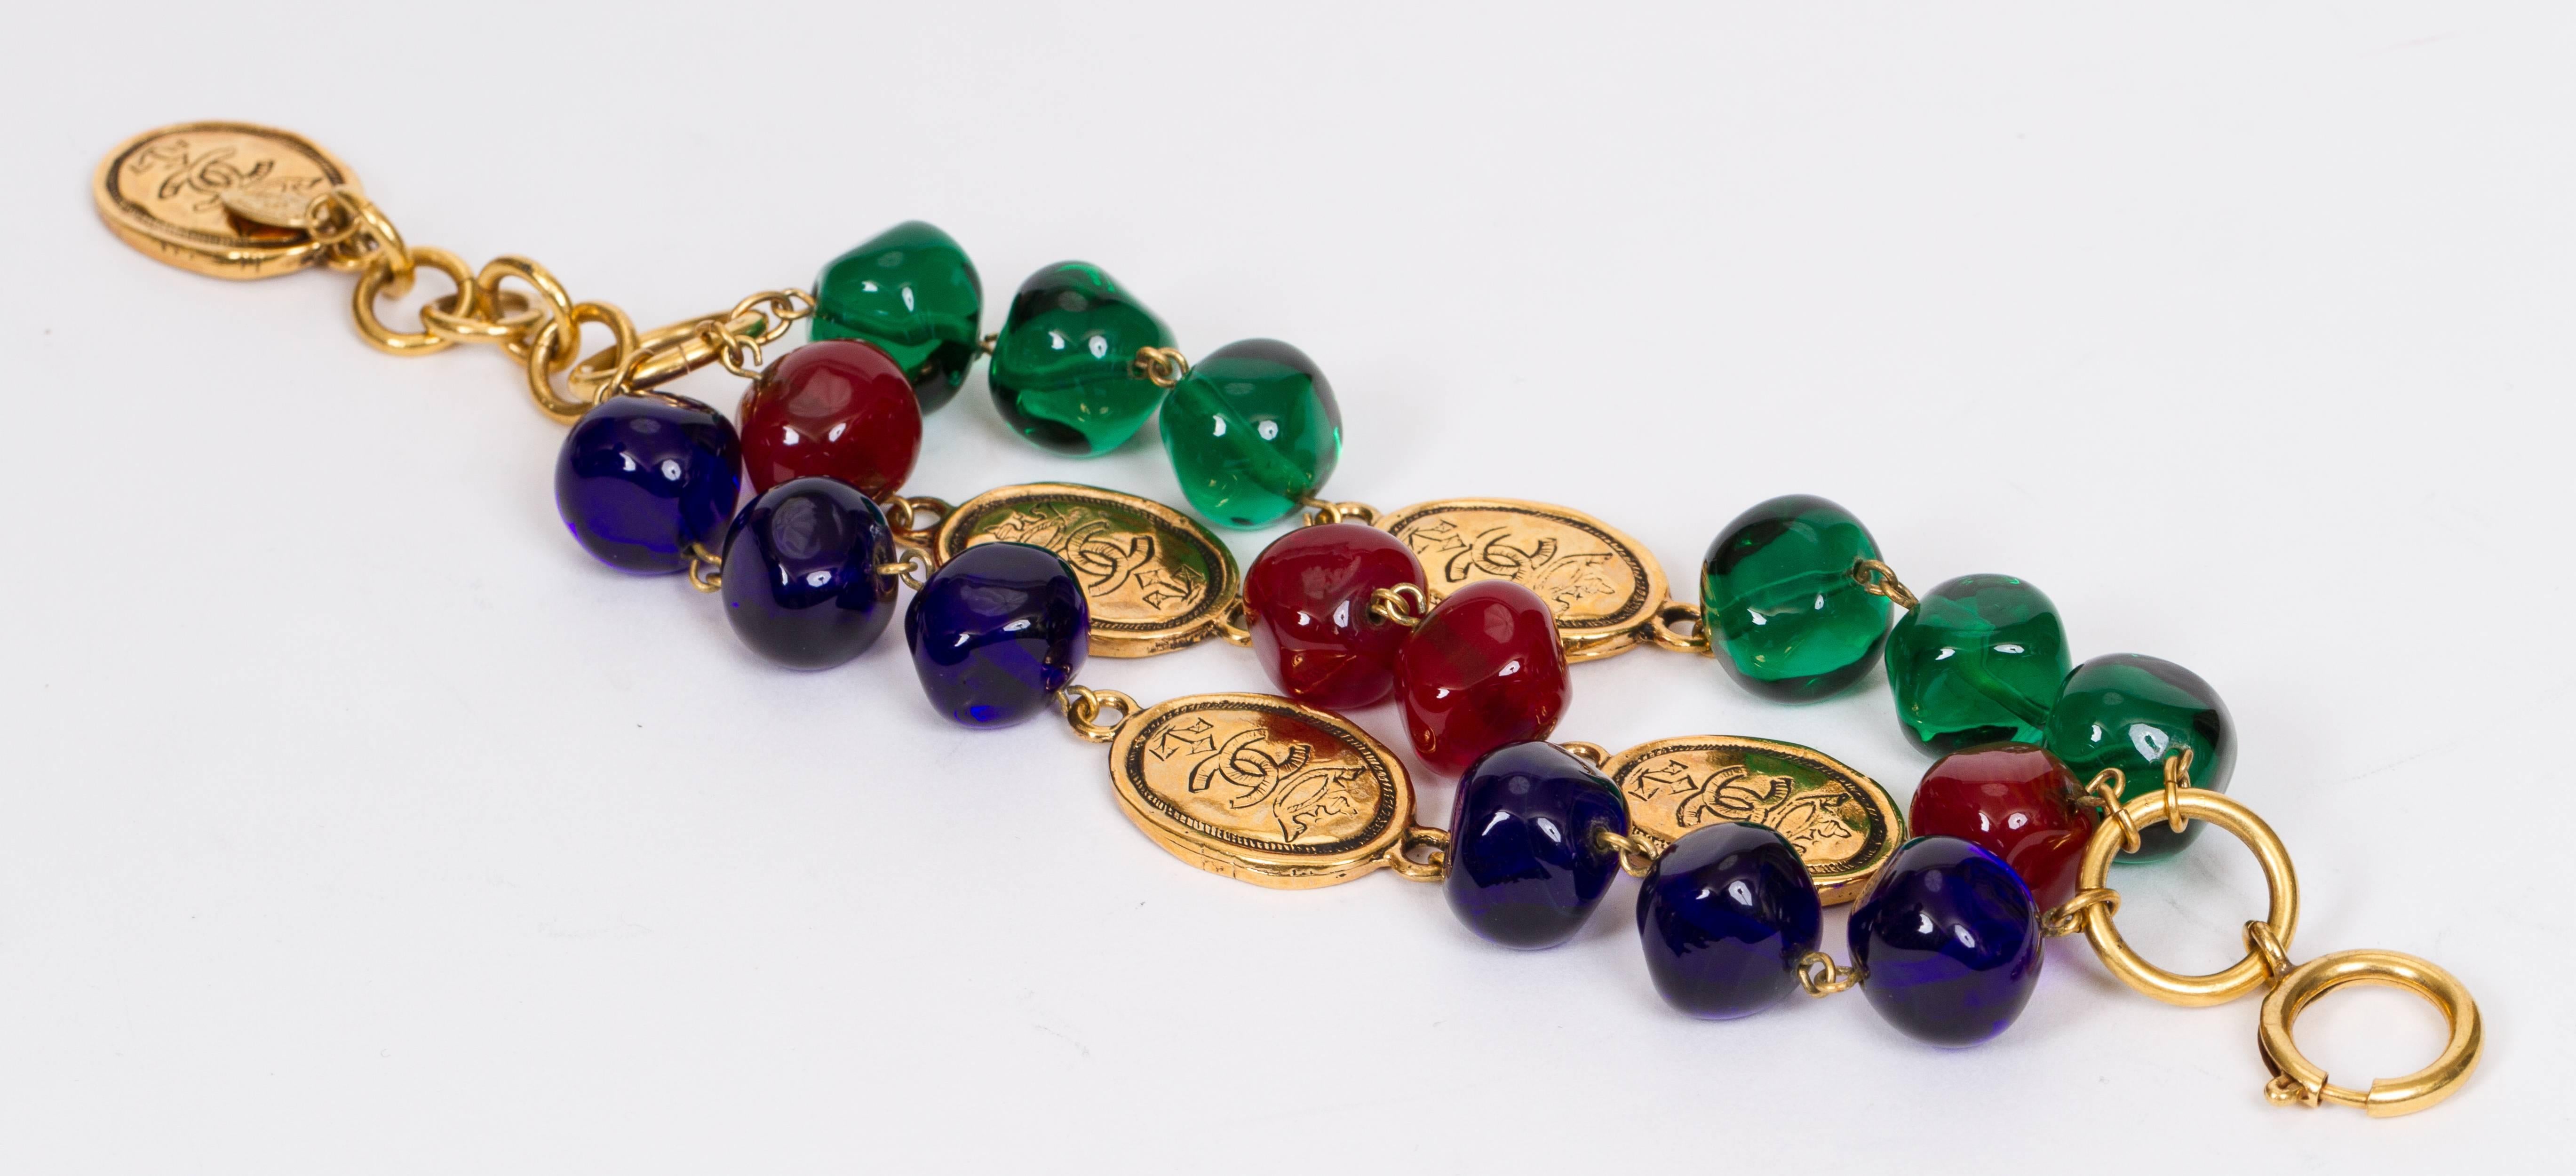 Chanel triple-strand red, blue, and green bead bracelet with goldtone logo coins. Collection 26 mid 1980s. Comes with velvet pouch.
